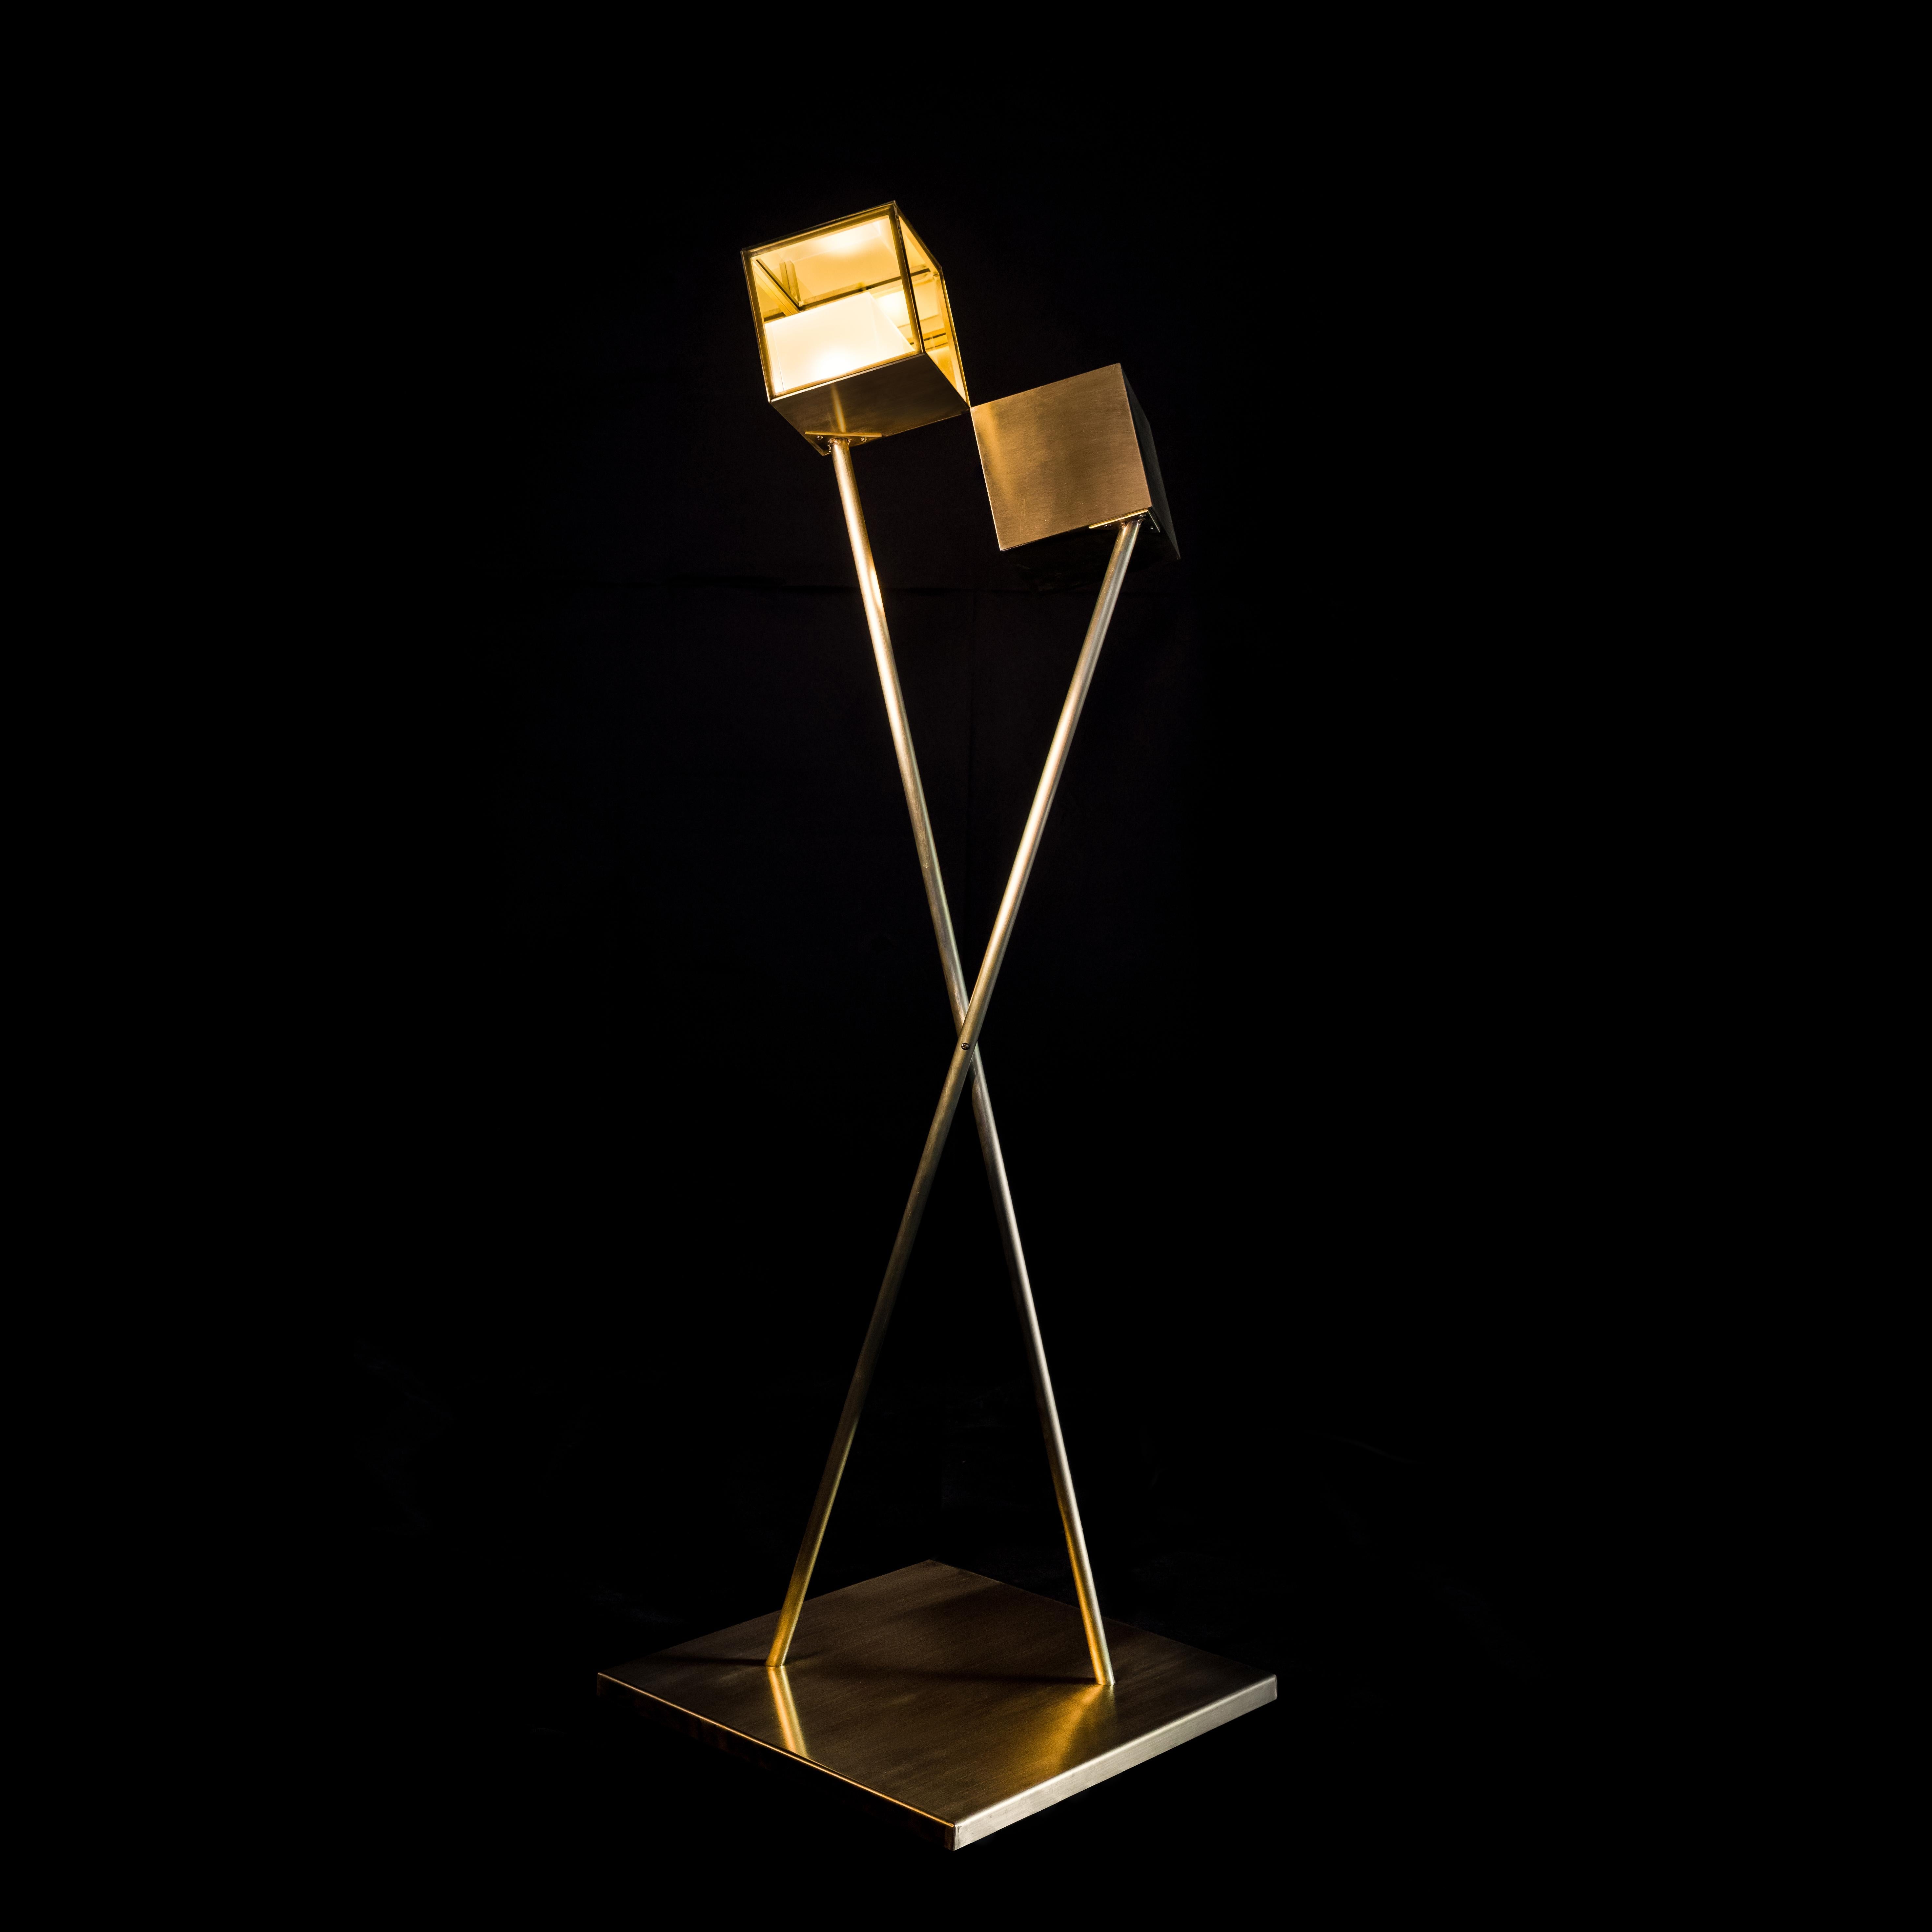 Flis is a sculptural floor lamp, a dynamic composition of two floating cubes. Each viewpoint unveils a different silhouette, a playful act between two elements reaching at their vertices, occasionally converging into a unity. 

When lit, the two